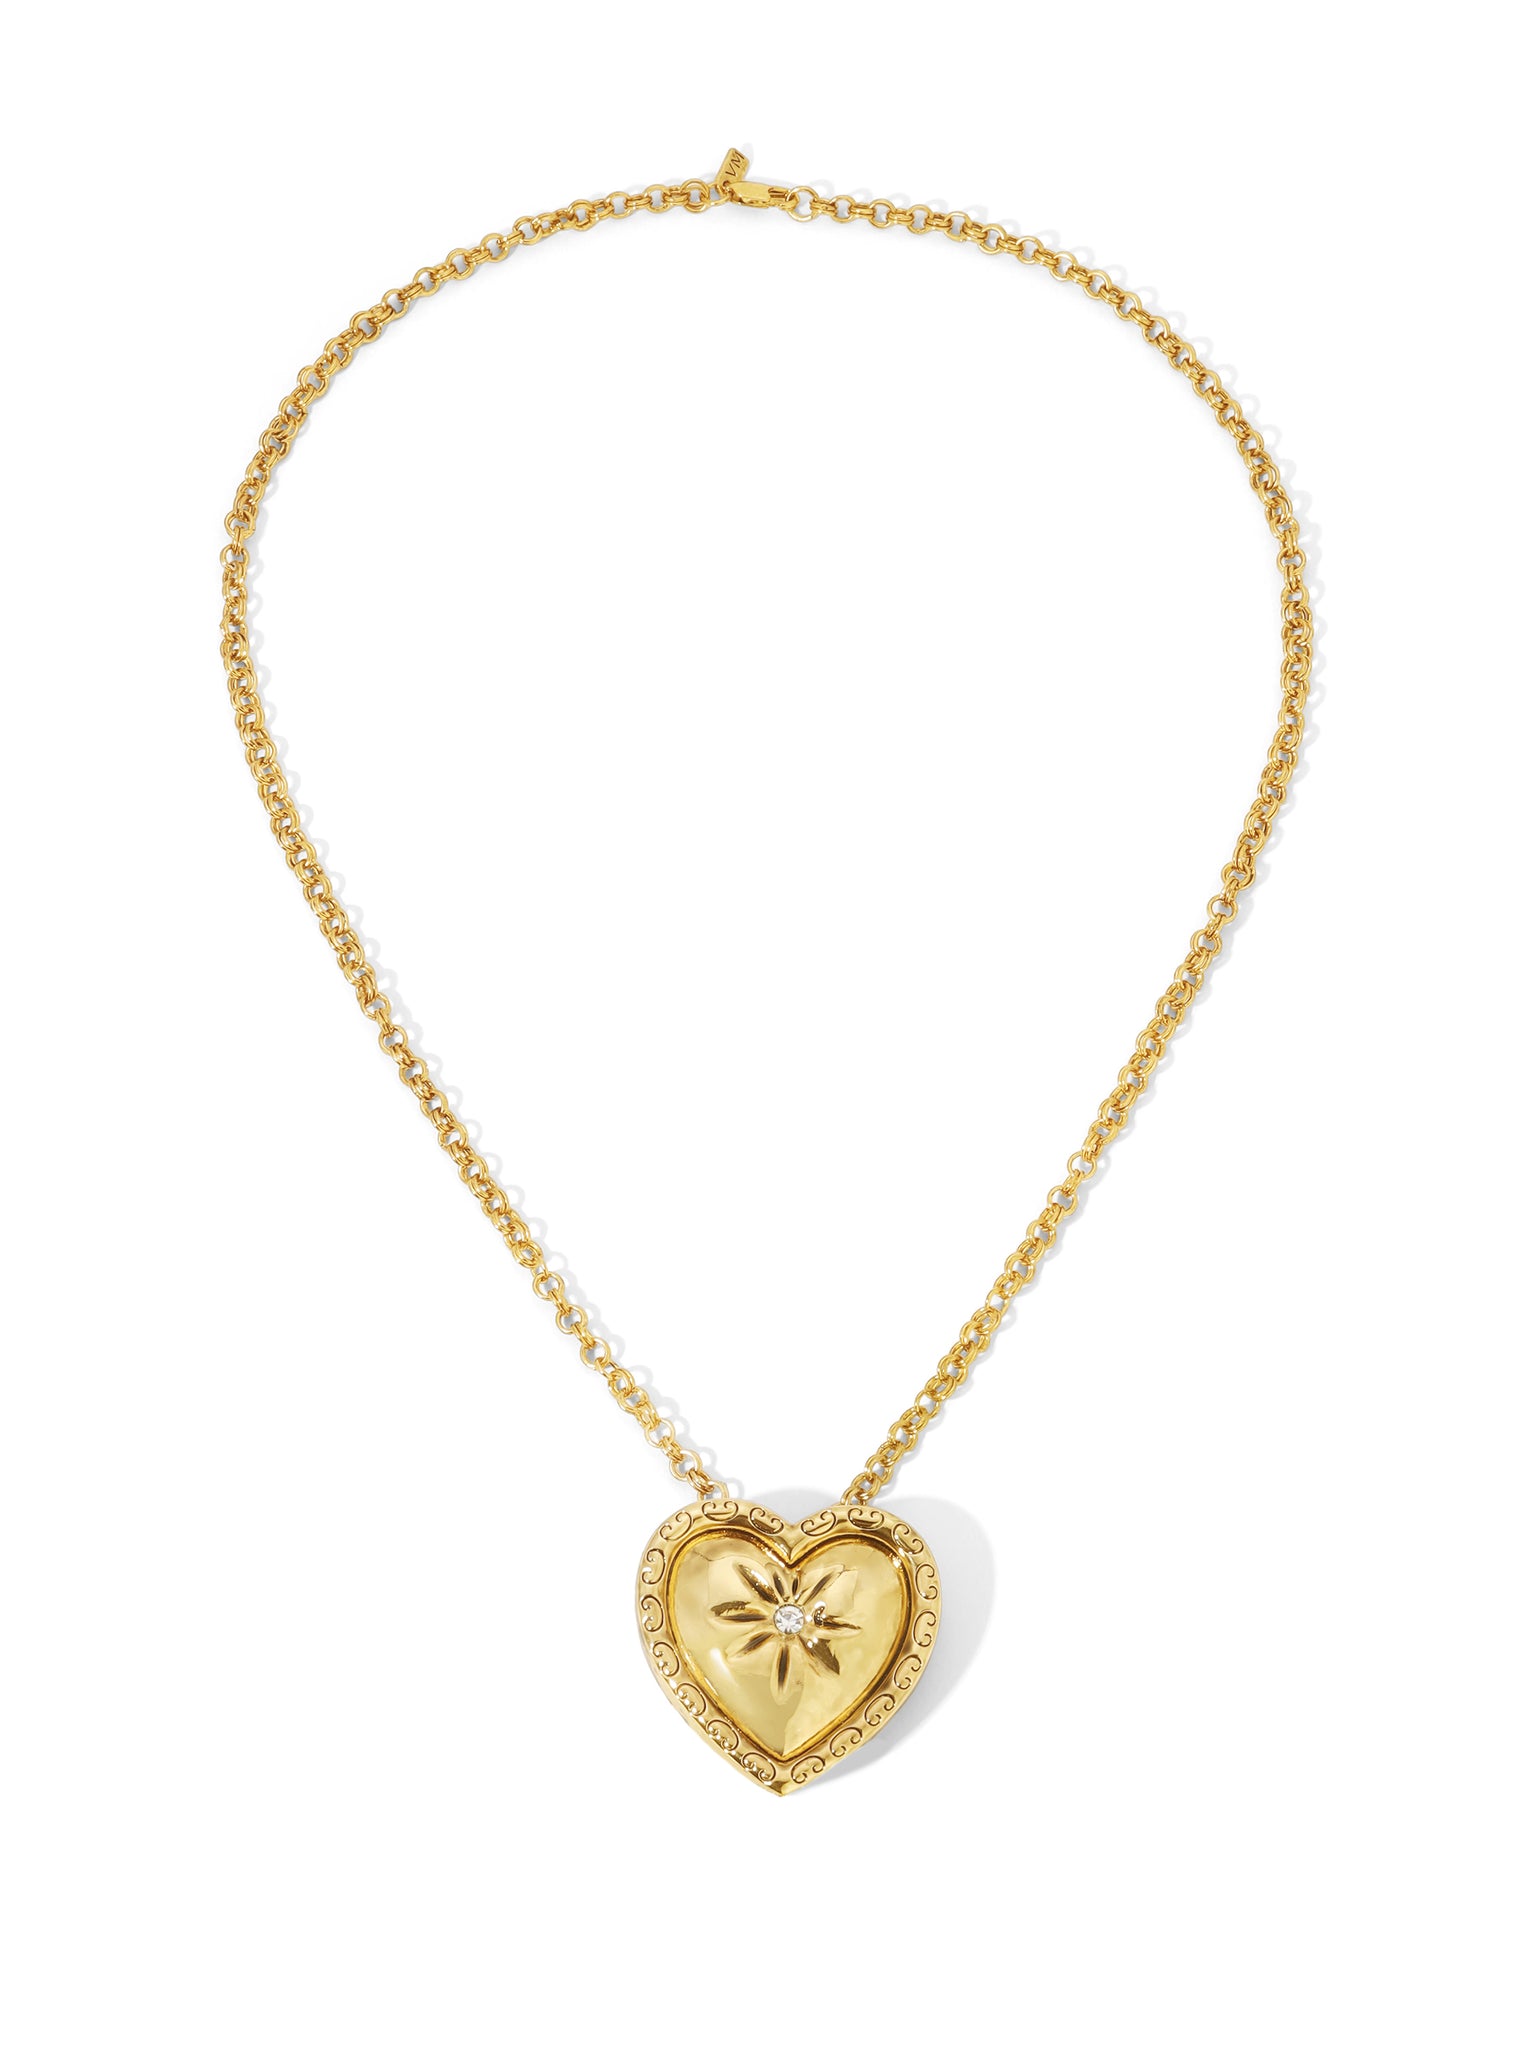 The Daphne Heart Necklace